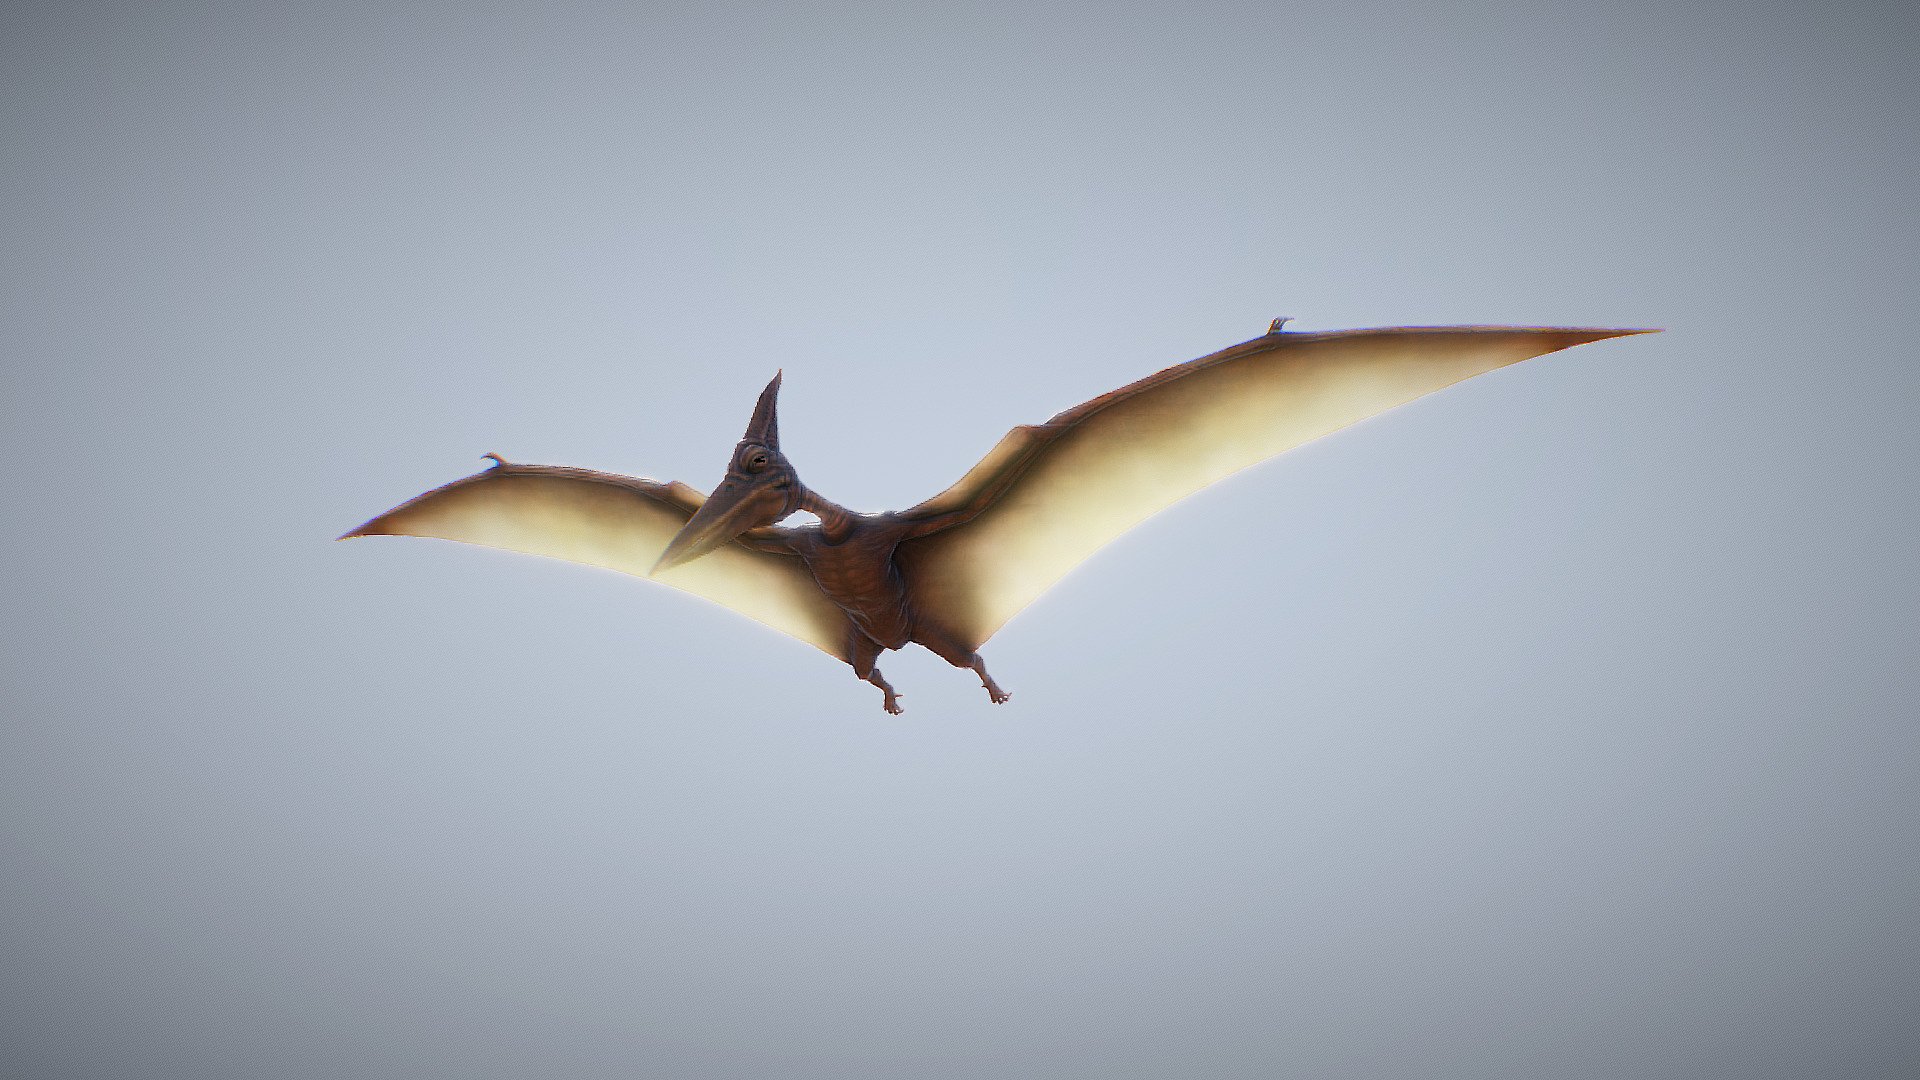 An Awesome Pterodactyle with animations for your games
Including Diffuse , normal , Roughness, Thickness &amp; SSS maps
7 Animations:
1. Idle 
2. Idle Shaking the Head
3. Walking
4. Walking as a Bat
5. Flying falping wings
6. Hovering
7. Hovering looking around - Animated Pterodactyle (Game Ready) - Buy Royalty Free 3D model by BlackantMaster 3d model